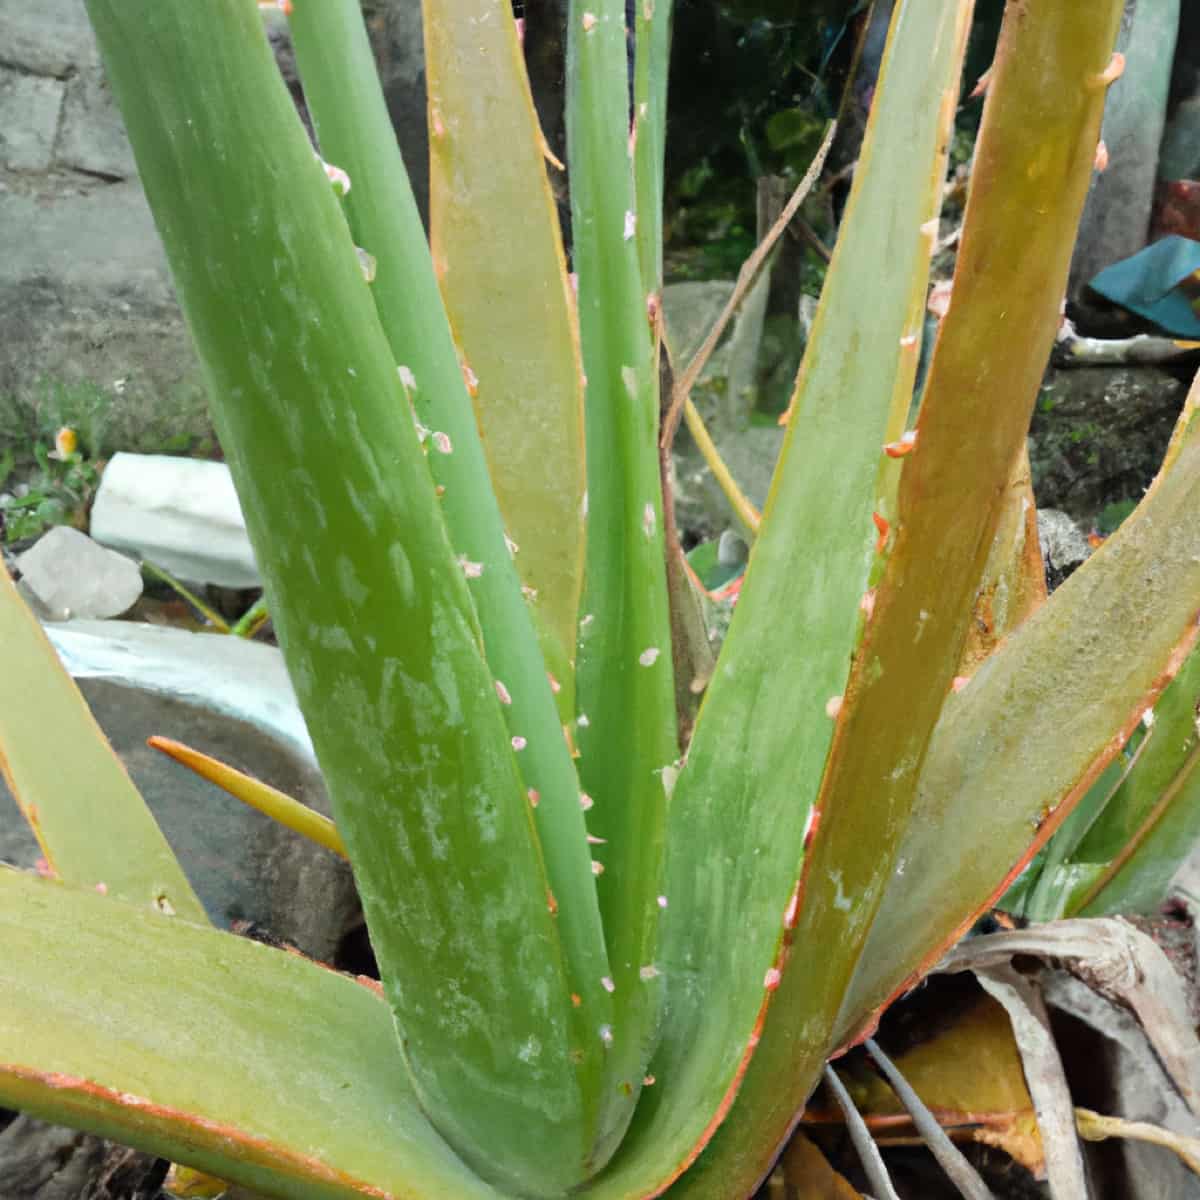 10 Reasons Why Your Aloe Vera is Turning Brown and Mushy